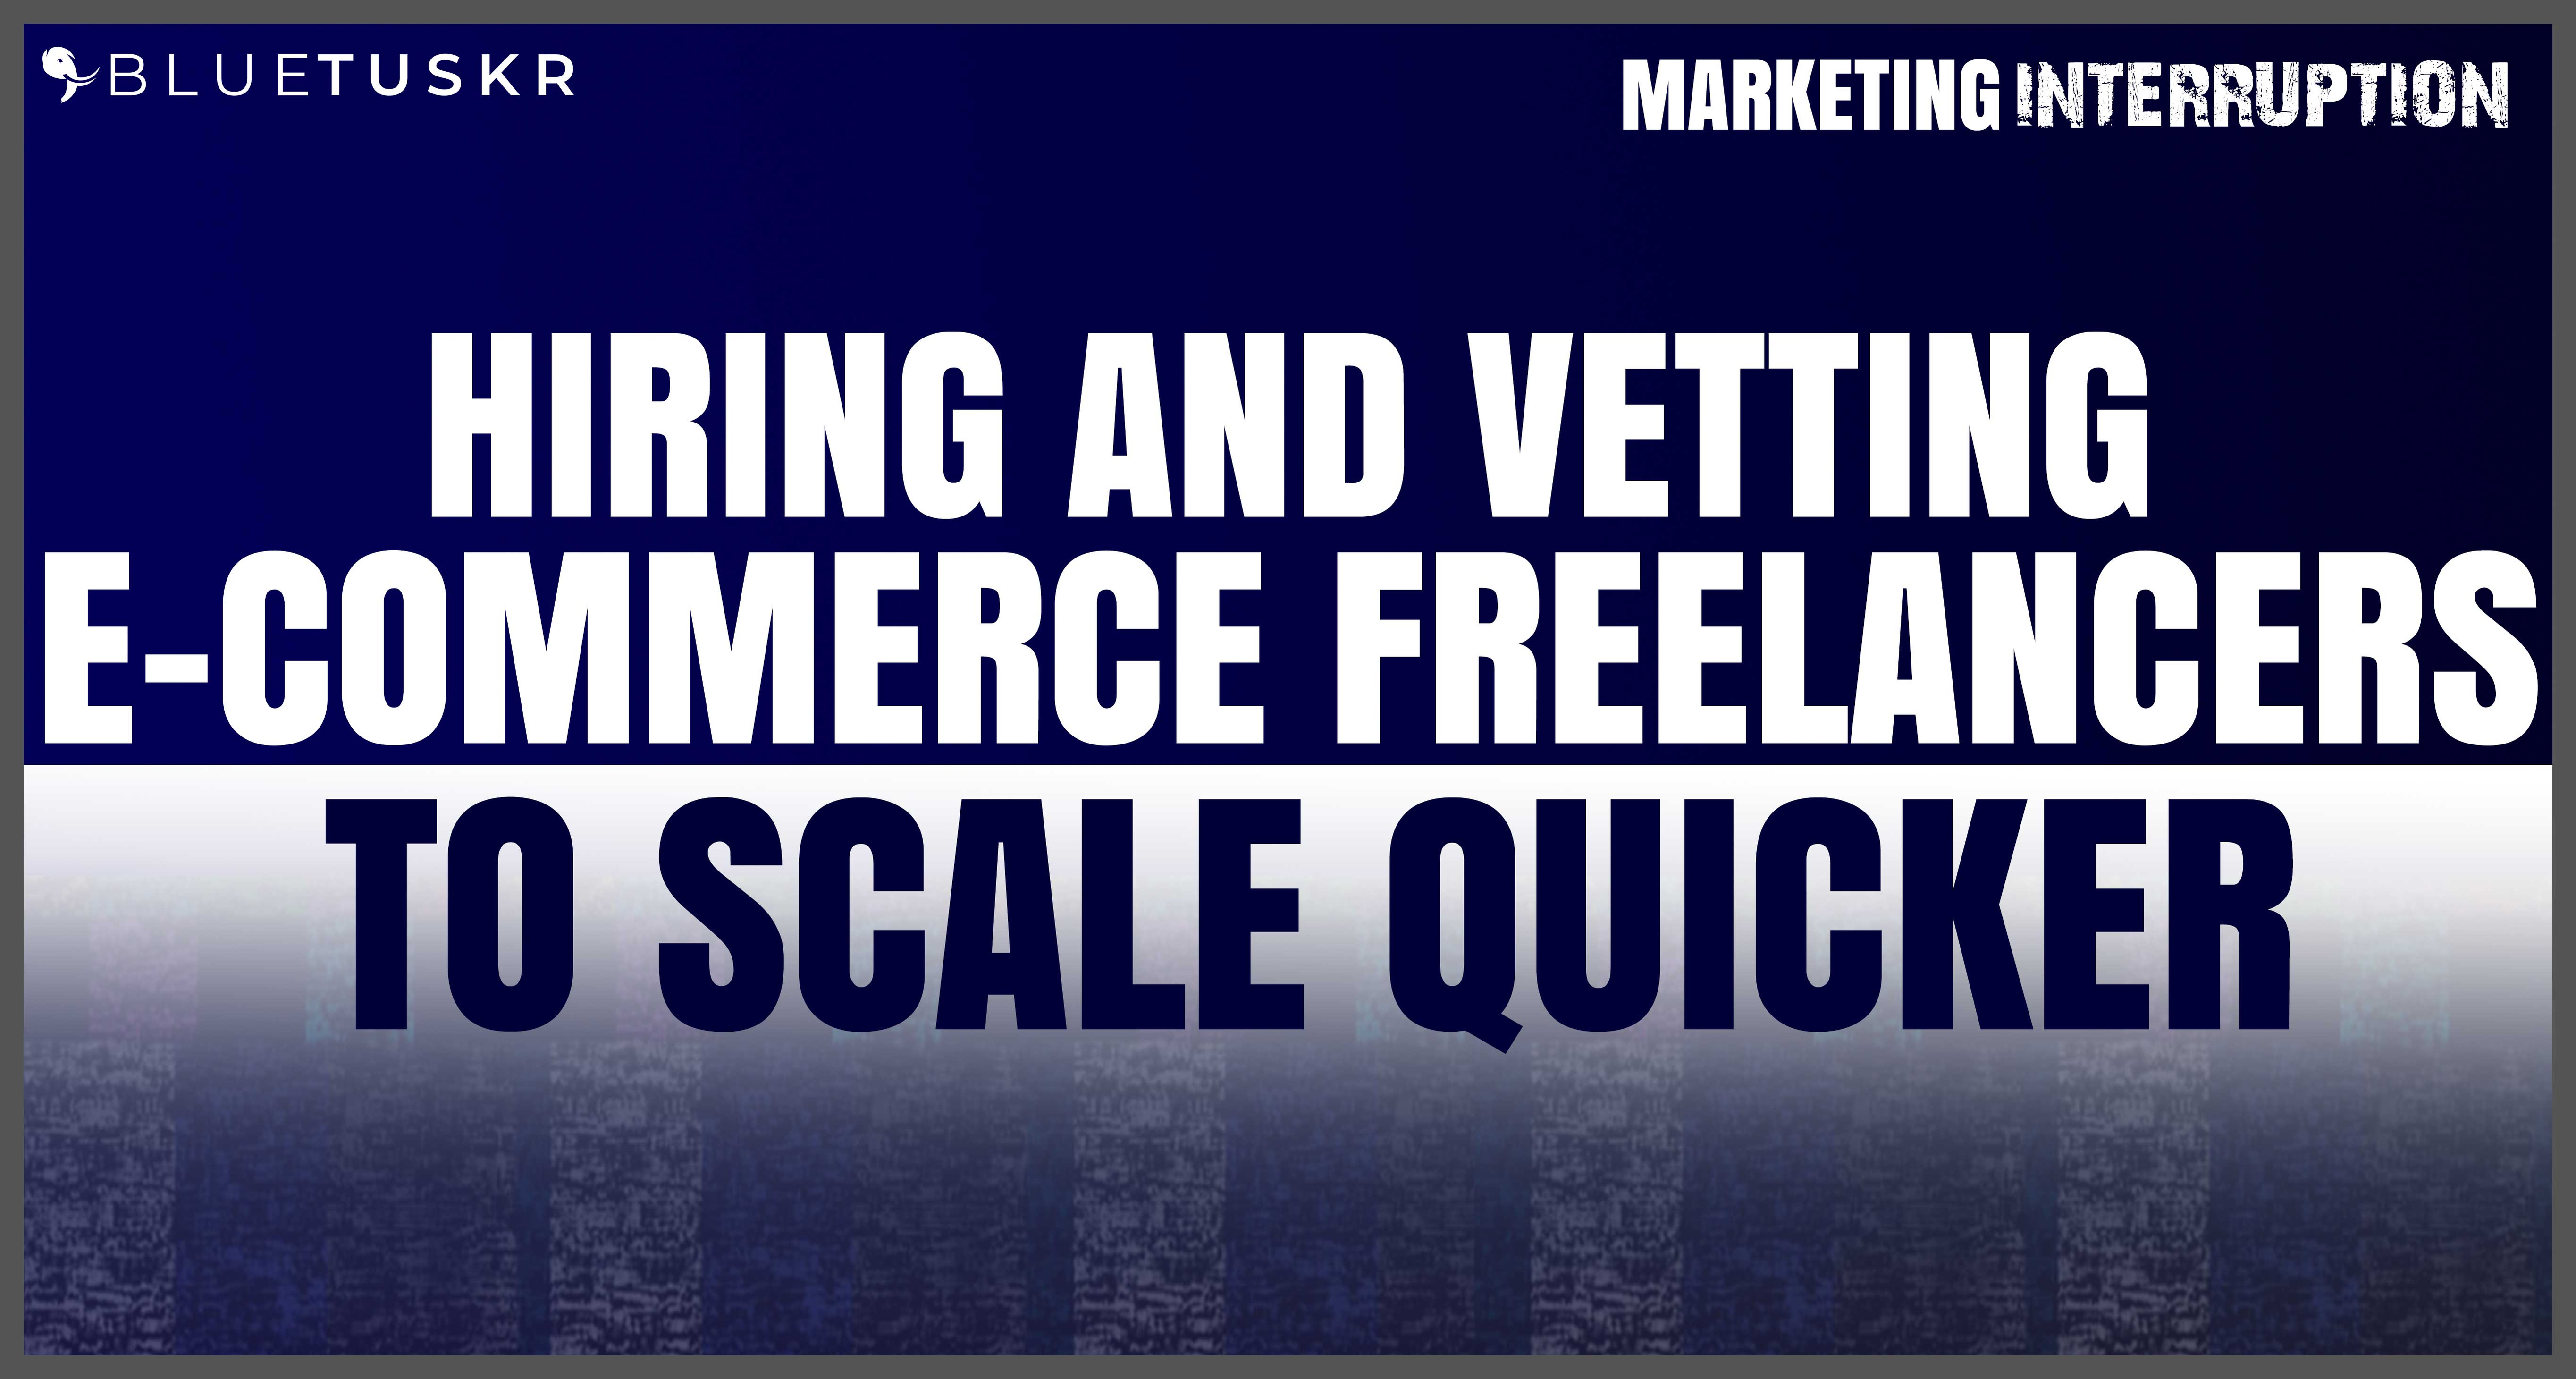 Hiring and Vetting E-commerce Freelancers to Scale Quicker